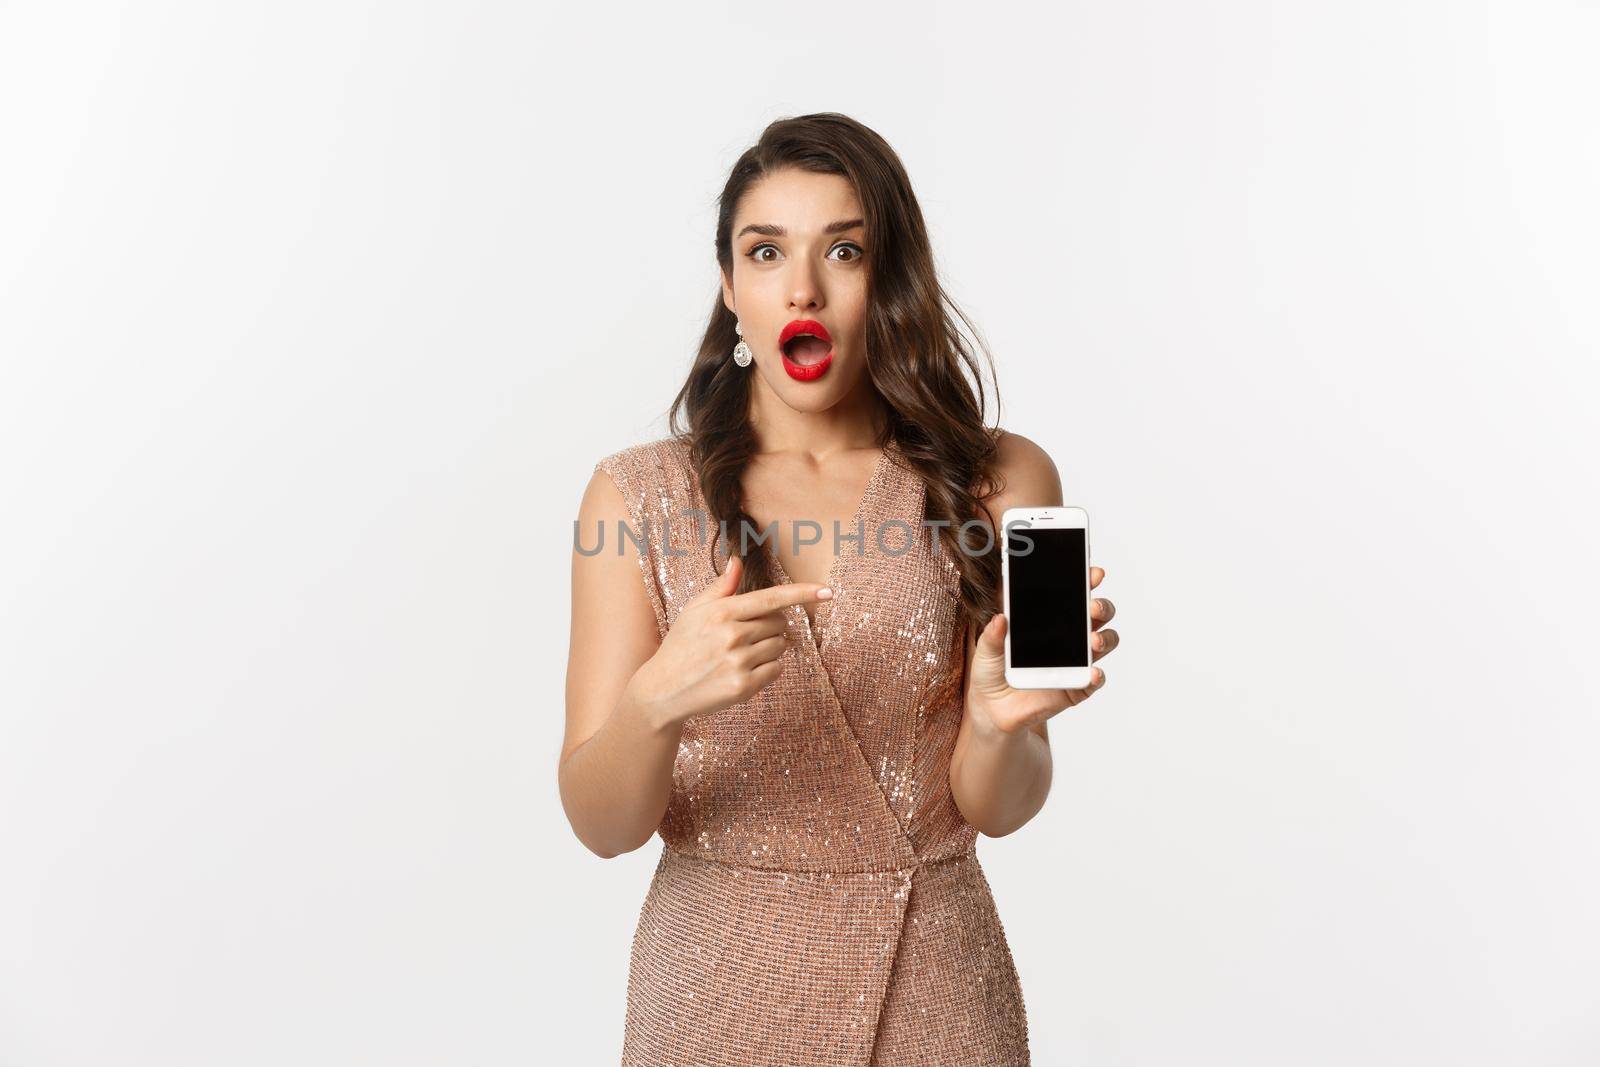 Online shopping. Amazed woman in elegant dress, red lips, pointing finger at mobile screen, showing app, standing over white background.